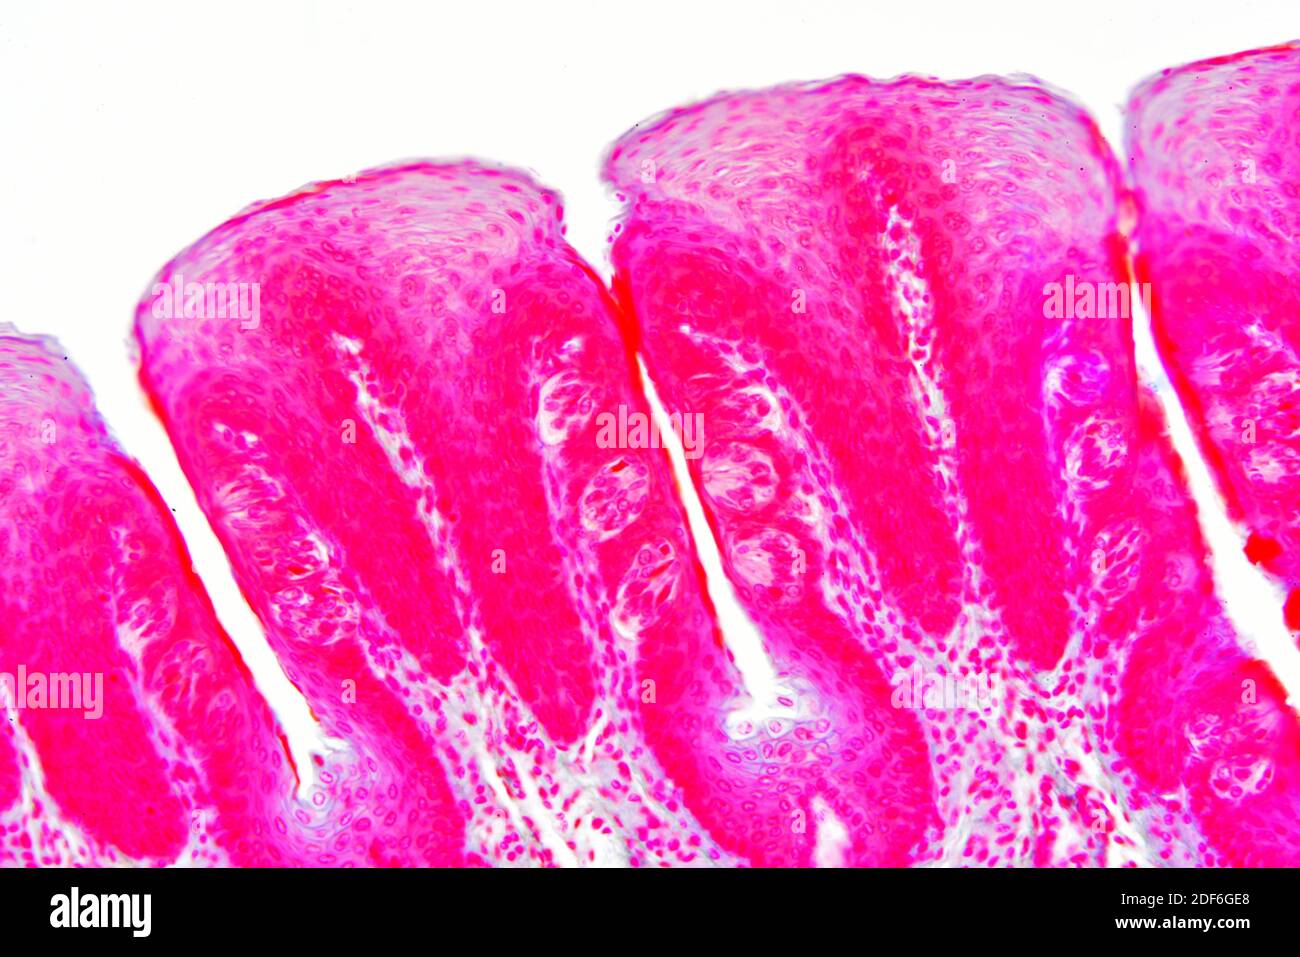 Tongue section showing taste buds and epithelium. Optical microscope X200. Stock Photo